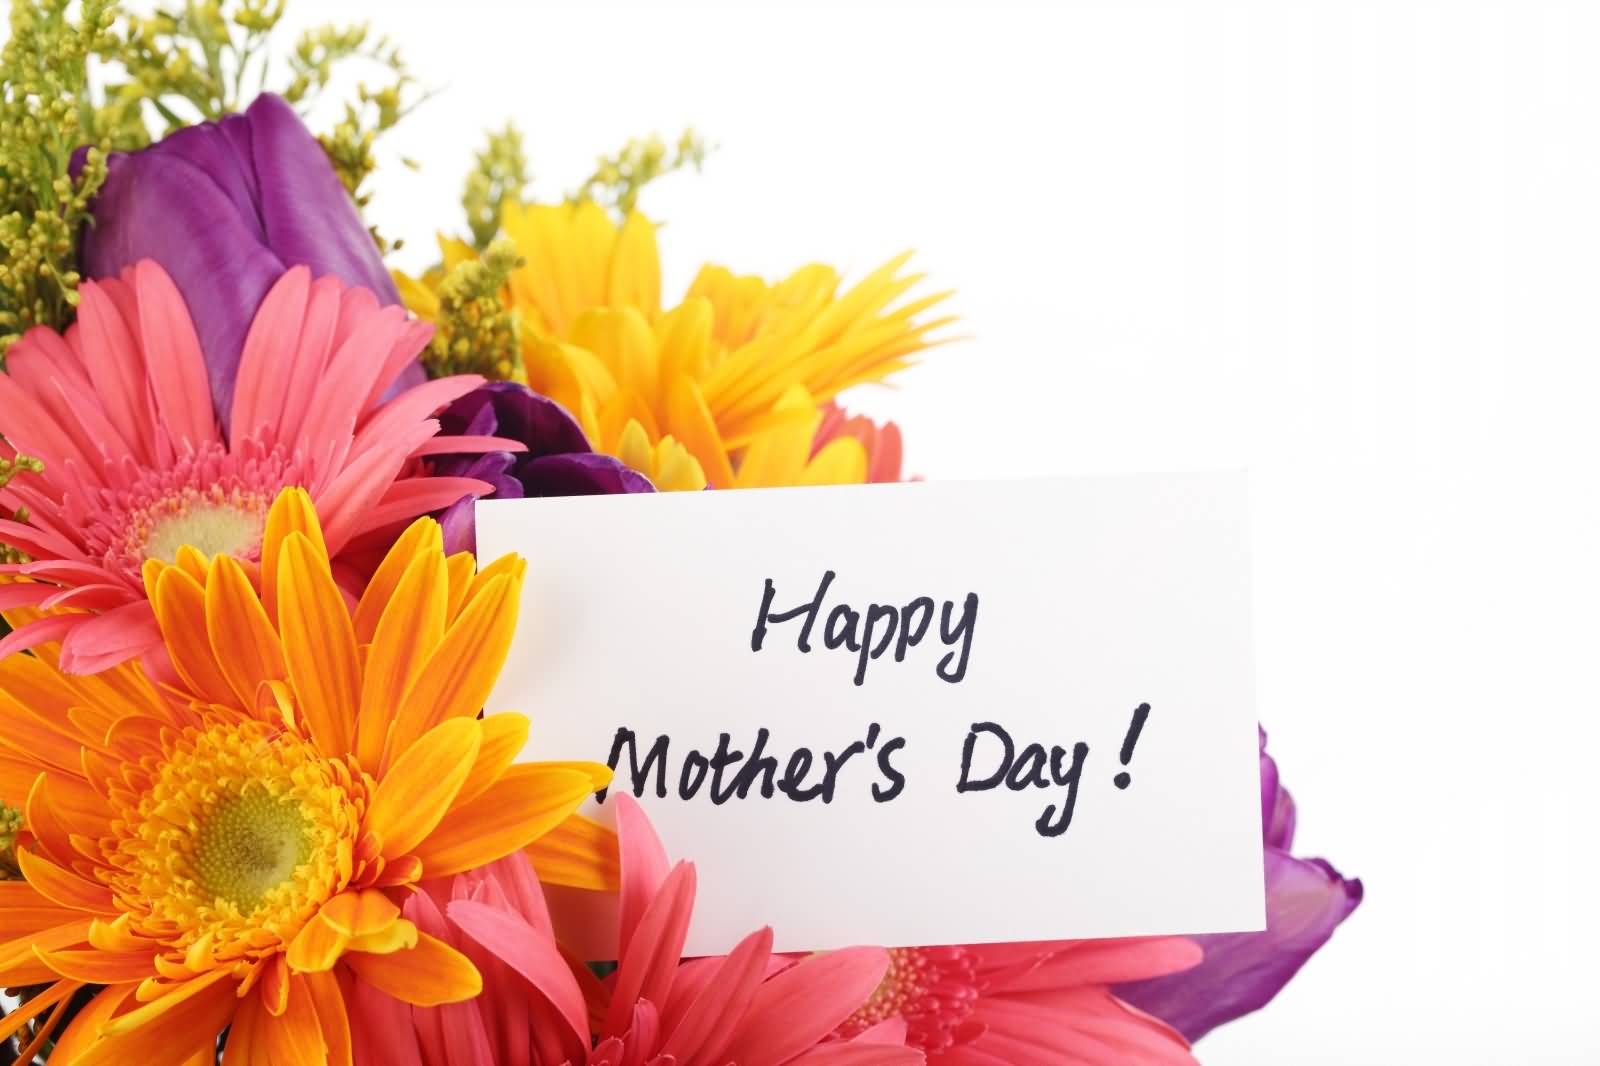 Happy Mother's Day Note With Flowers